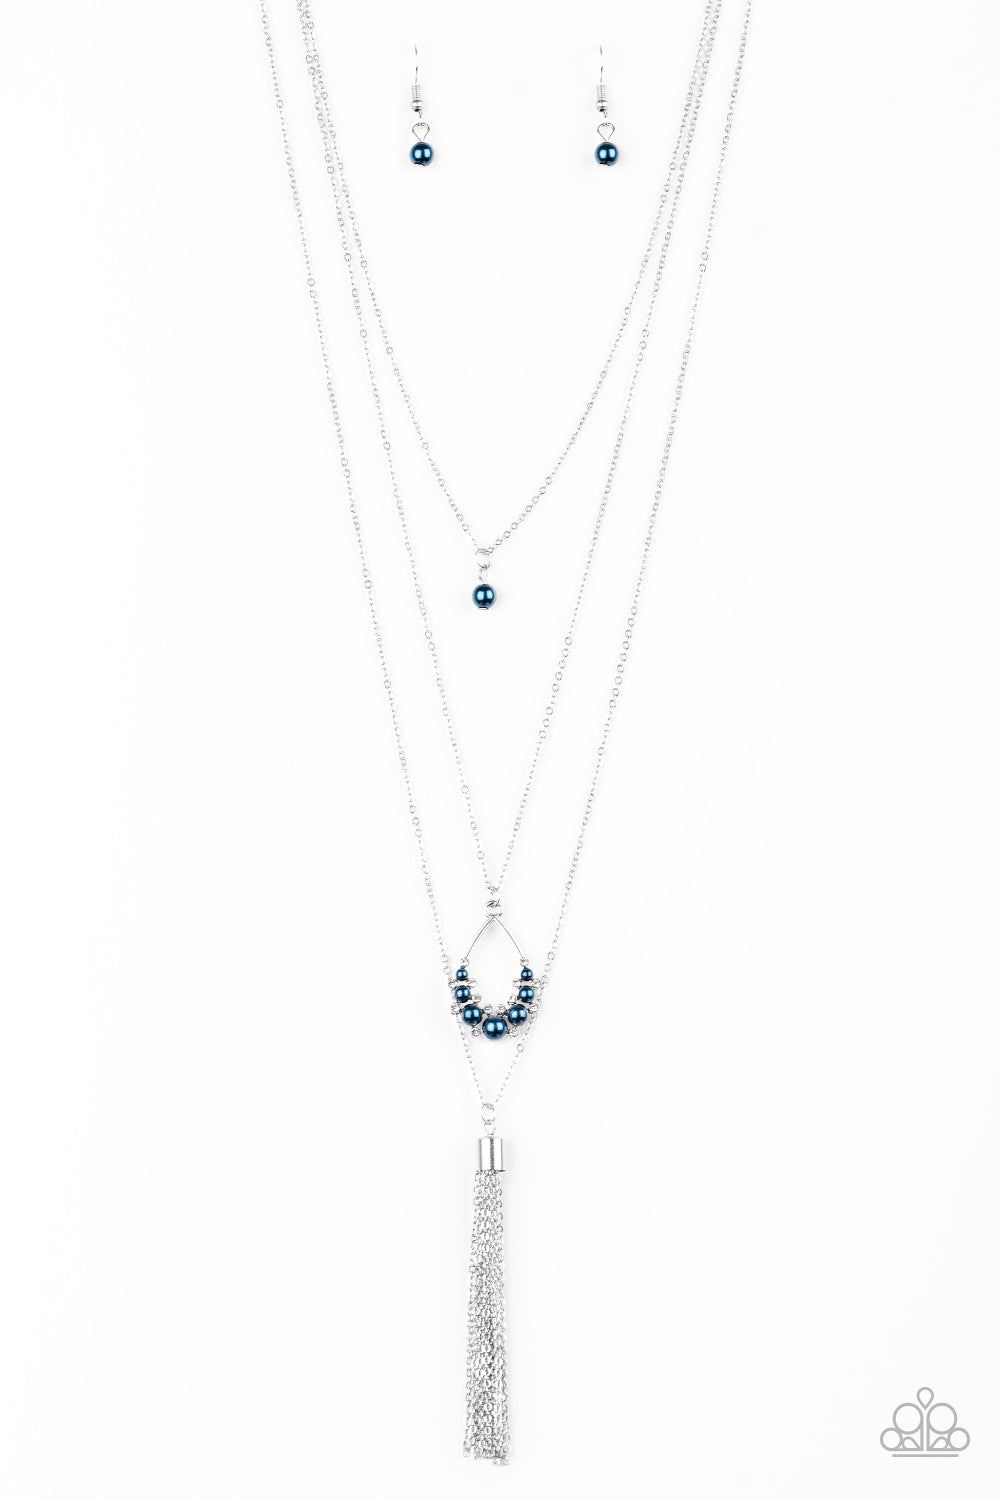 Paparazzi Accessories - Be Fancy - Blue Necklace - Alies Bling Bar